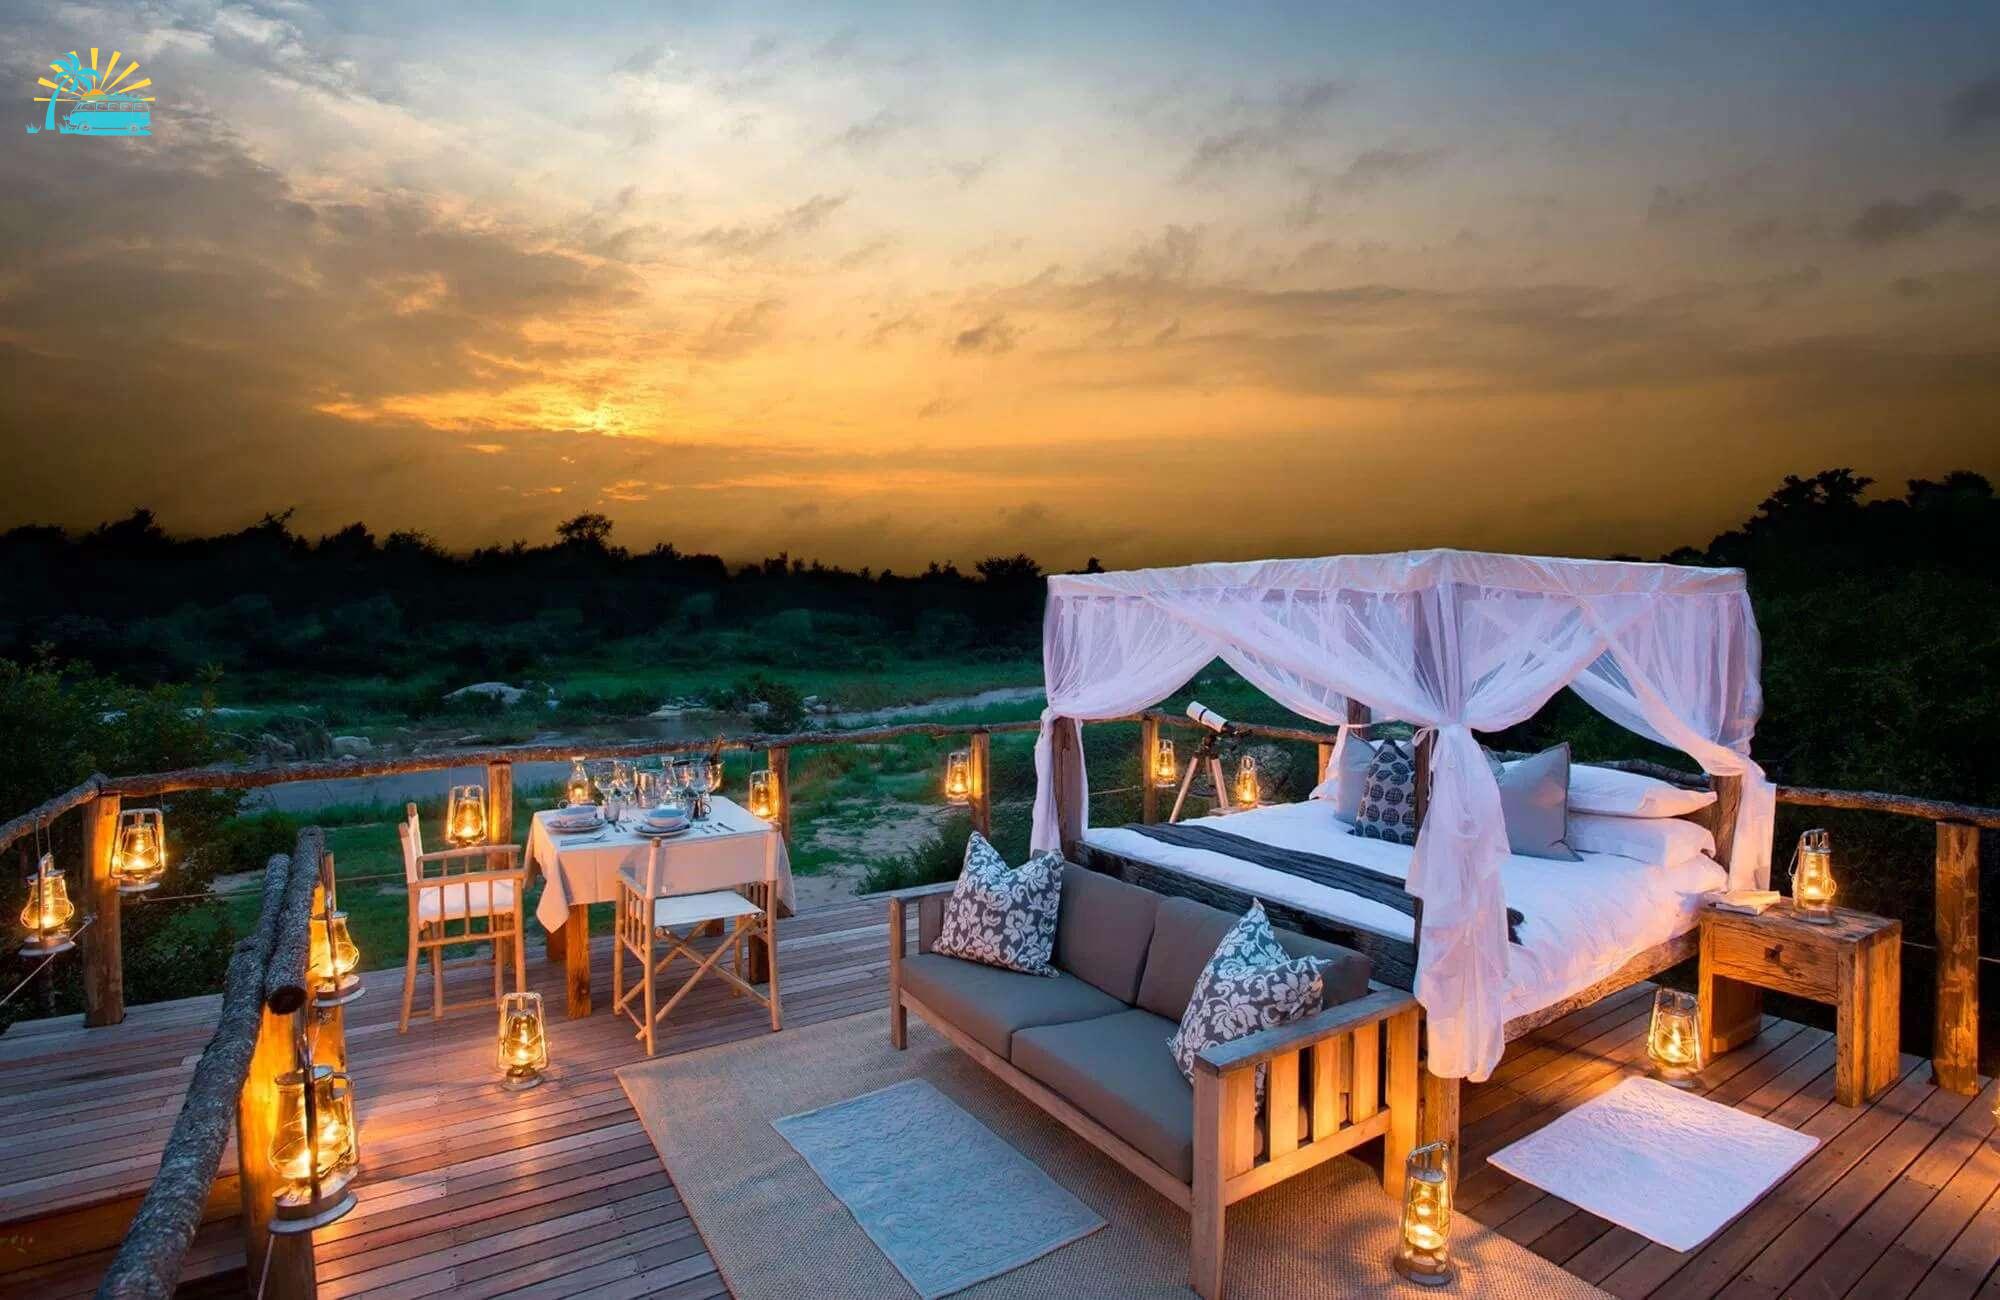 A magical setting atop the treehouse in Lion Sands Game Reserve in Kruger National Park